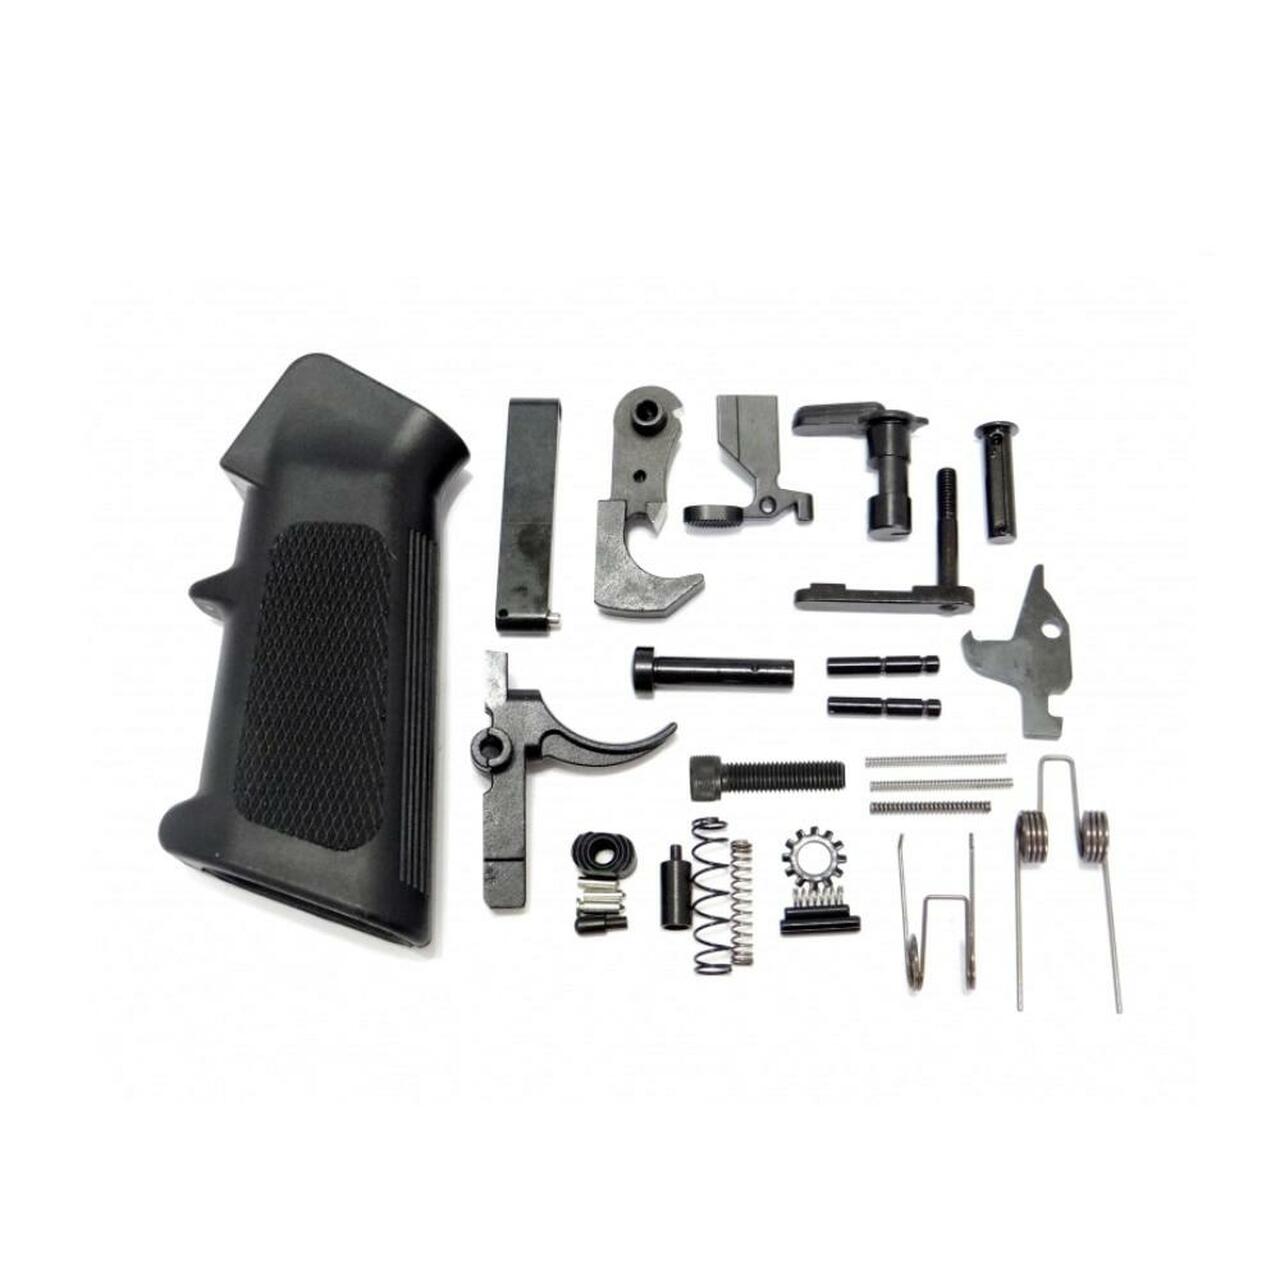 AR 15 Lower Parts Kit: With Standard Trigger